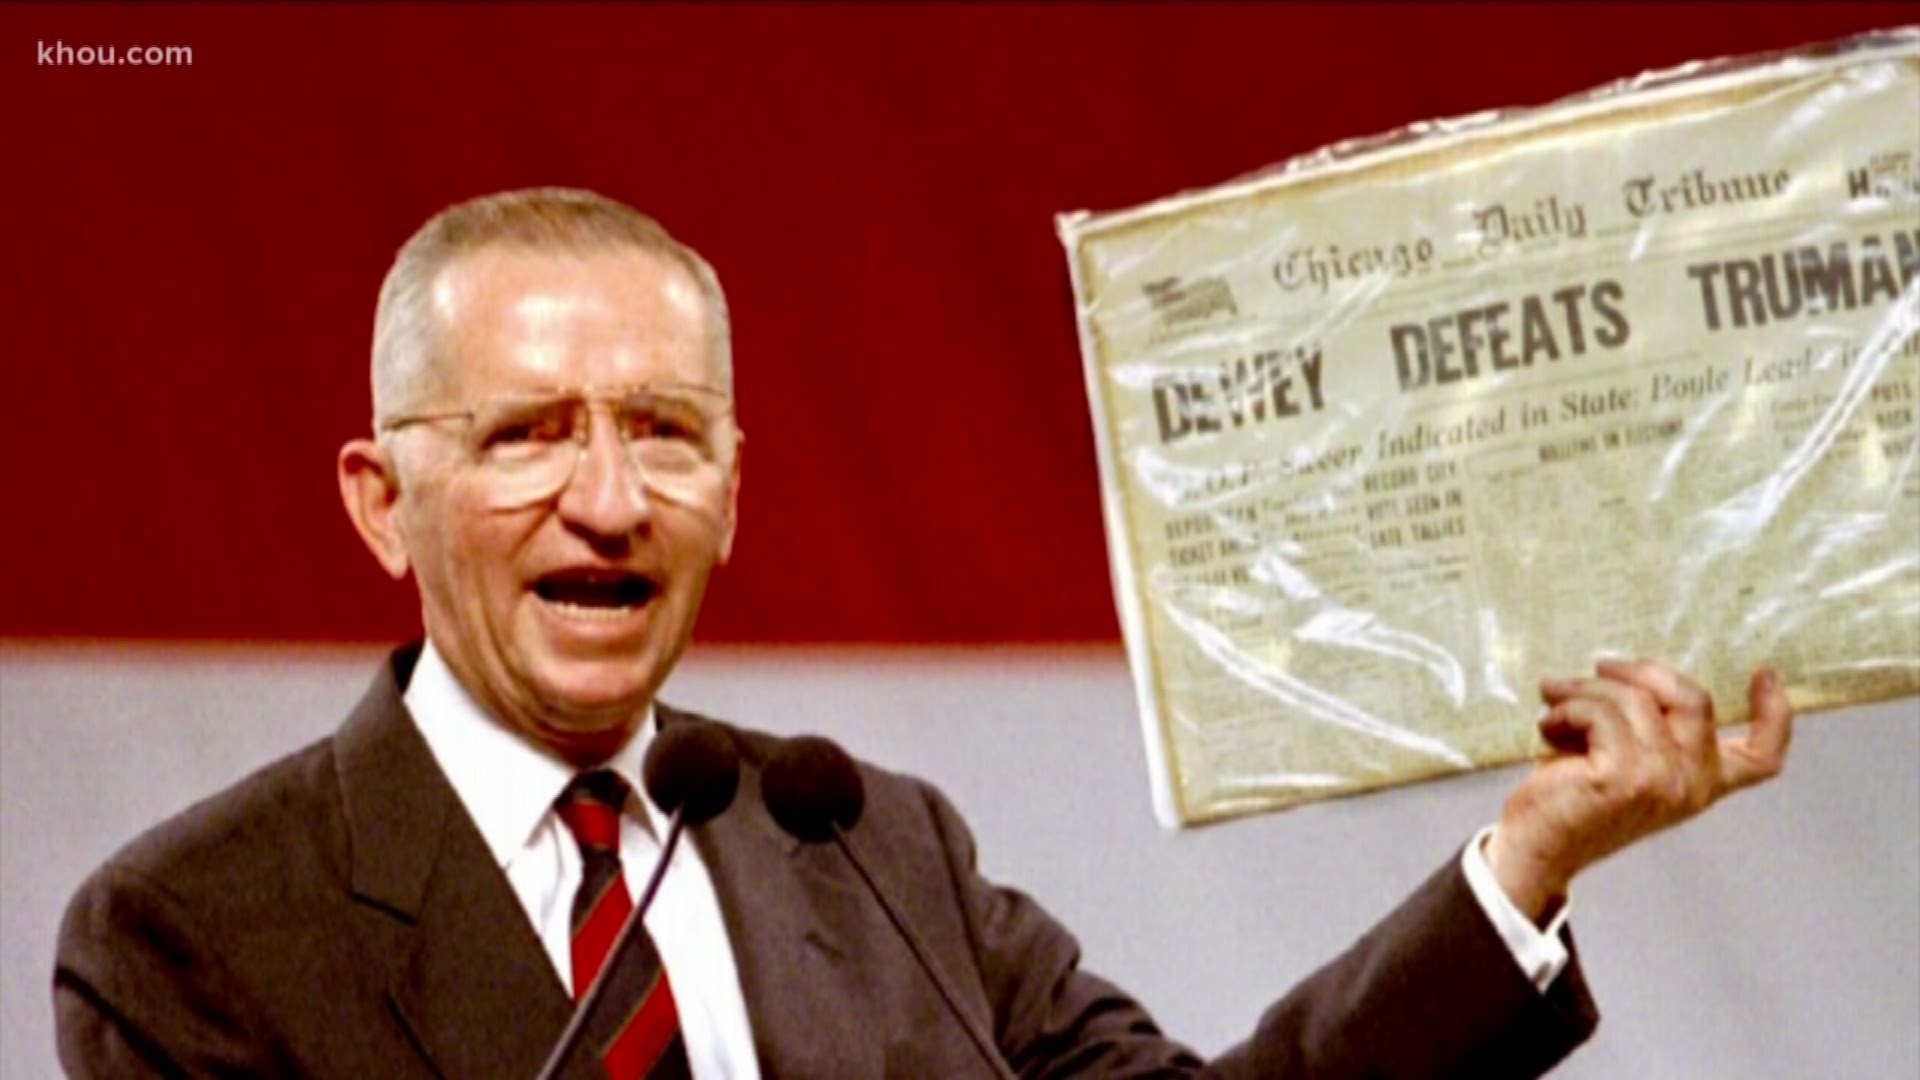 When Ross Perot died, Texans mourned the loss. But now people are upset about something he's rumored to have done after his death. But is it real? We looked into it.